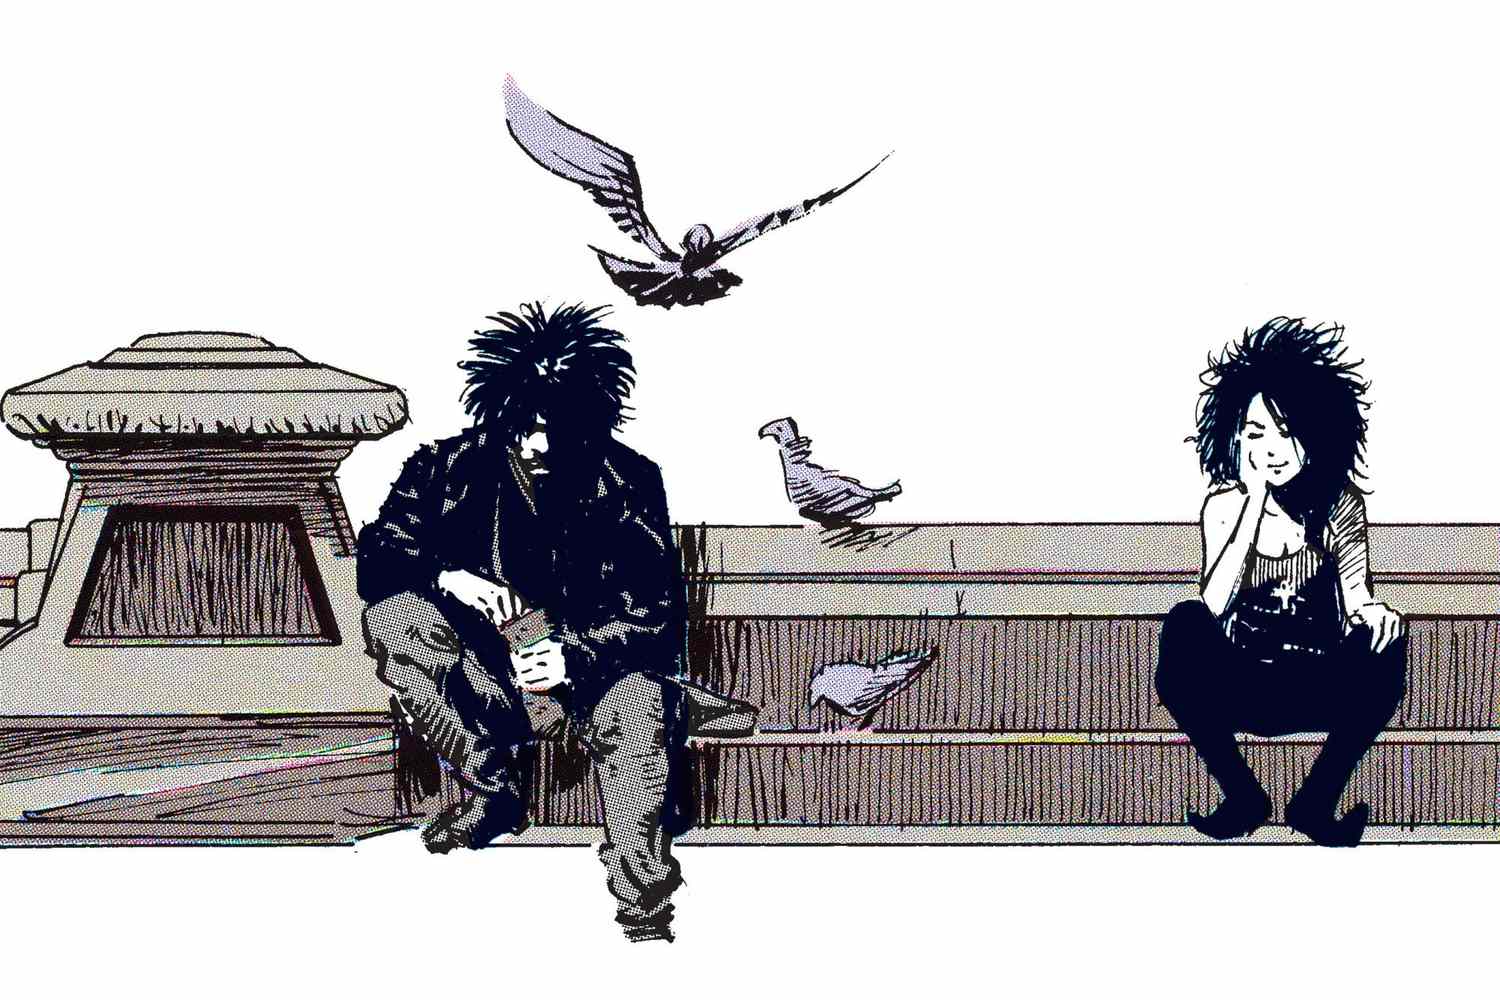 Exploring the Enchanting World of “The Sandman”: A 10 volume Masterpiece of Graphic Literature